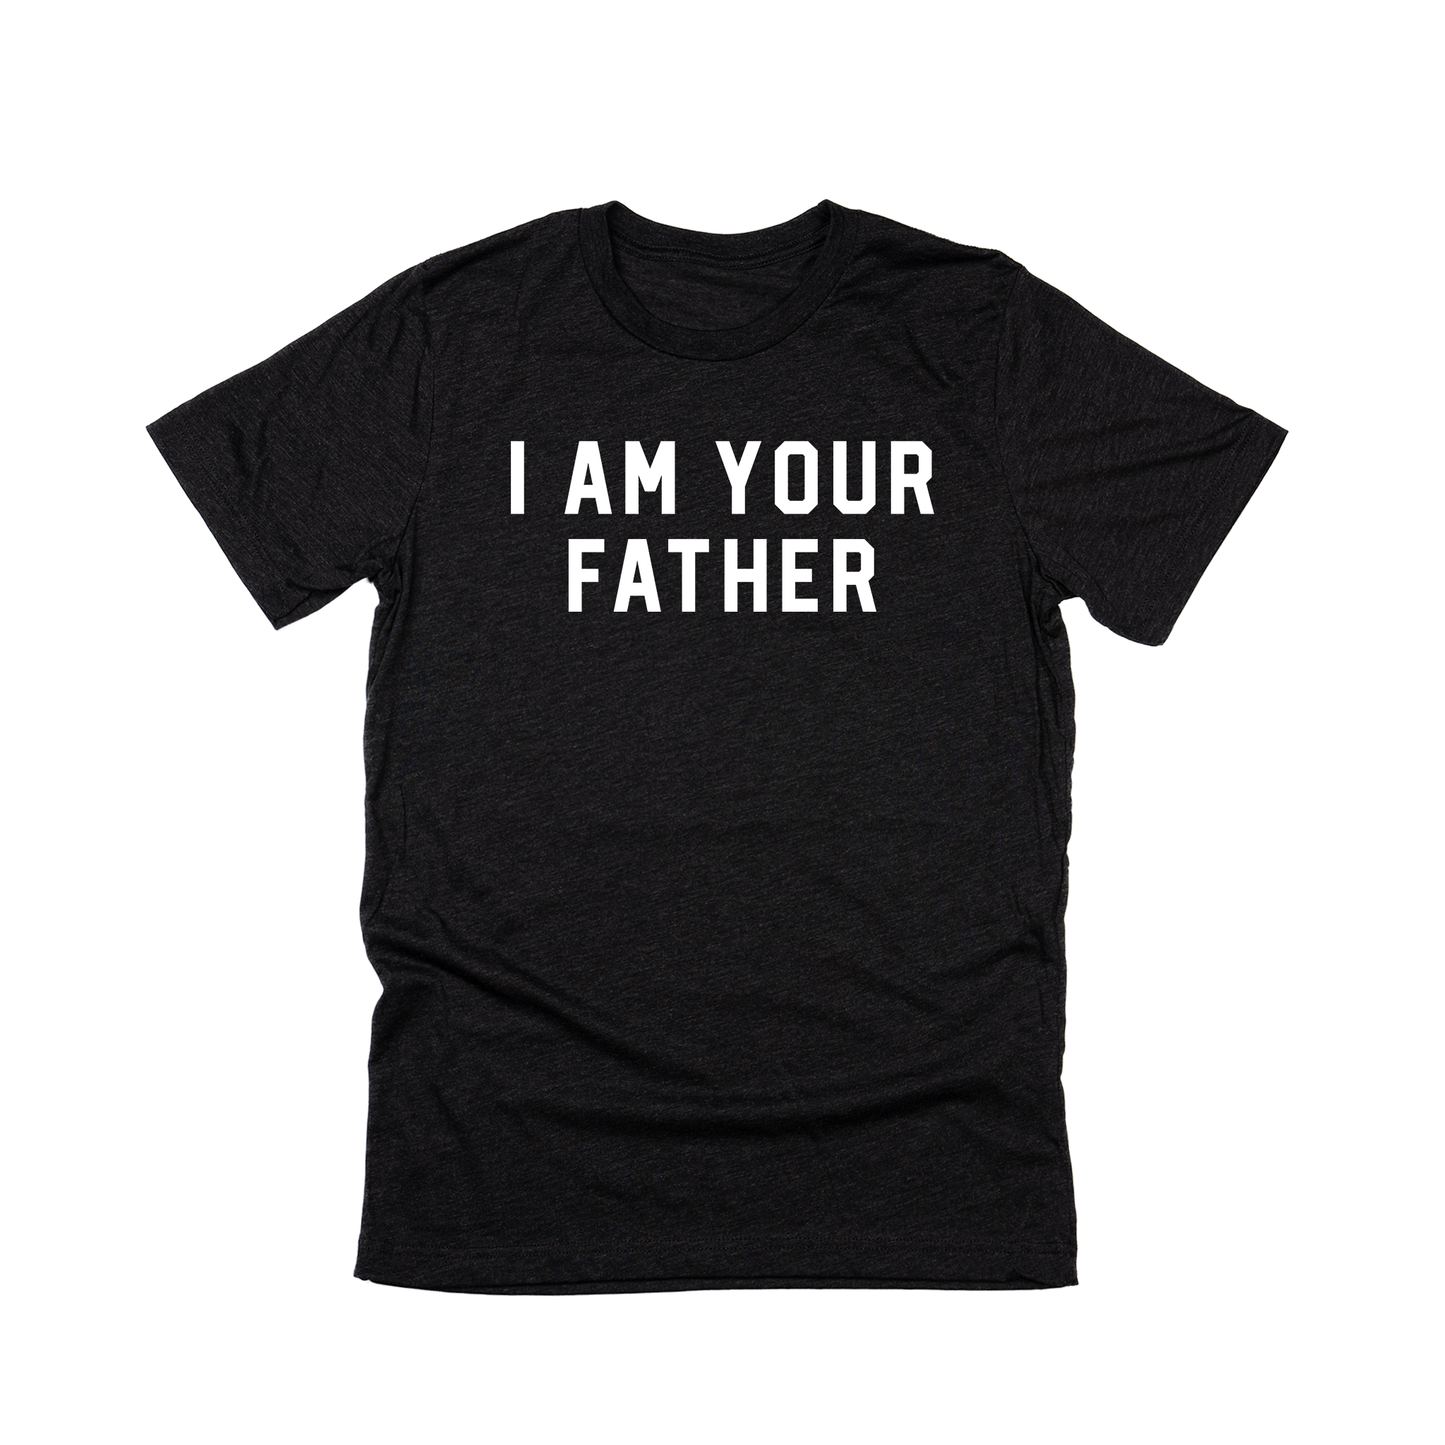 I Am Your Father (White) - Tee (Charcoal Black)